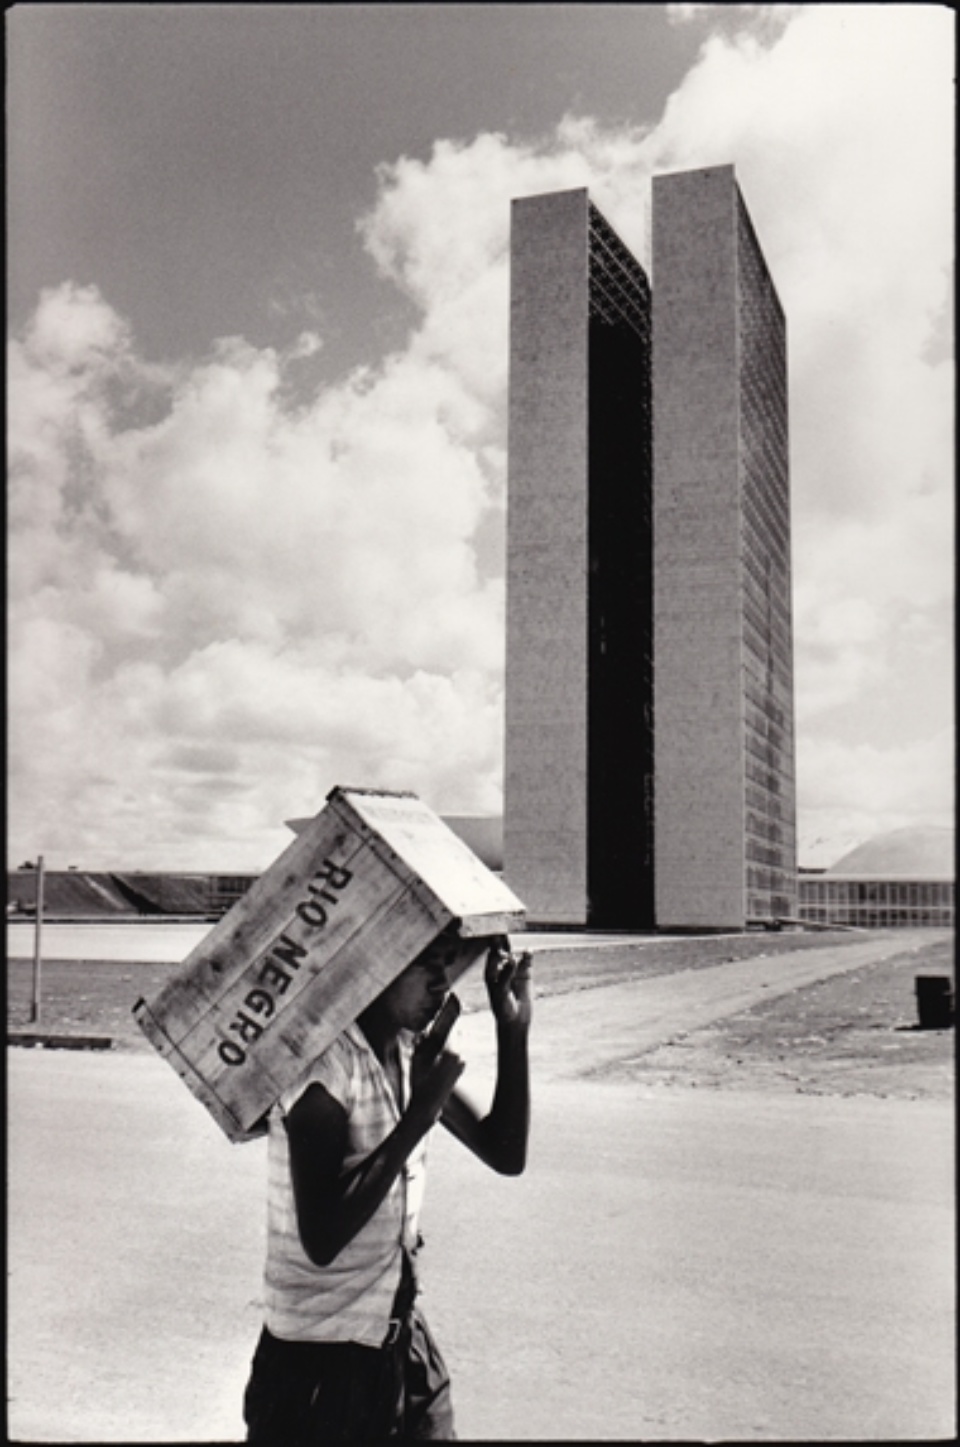 René Burri Brasilia Brasilien, 1960 Signed, titled and dated on verso Gelatin silver print, printed later